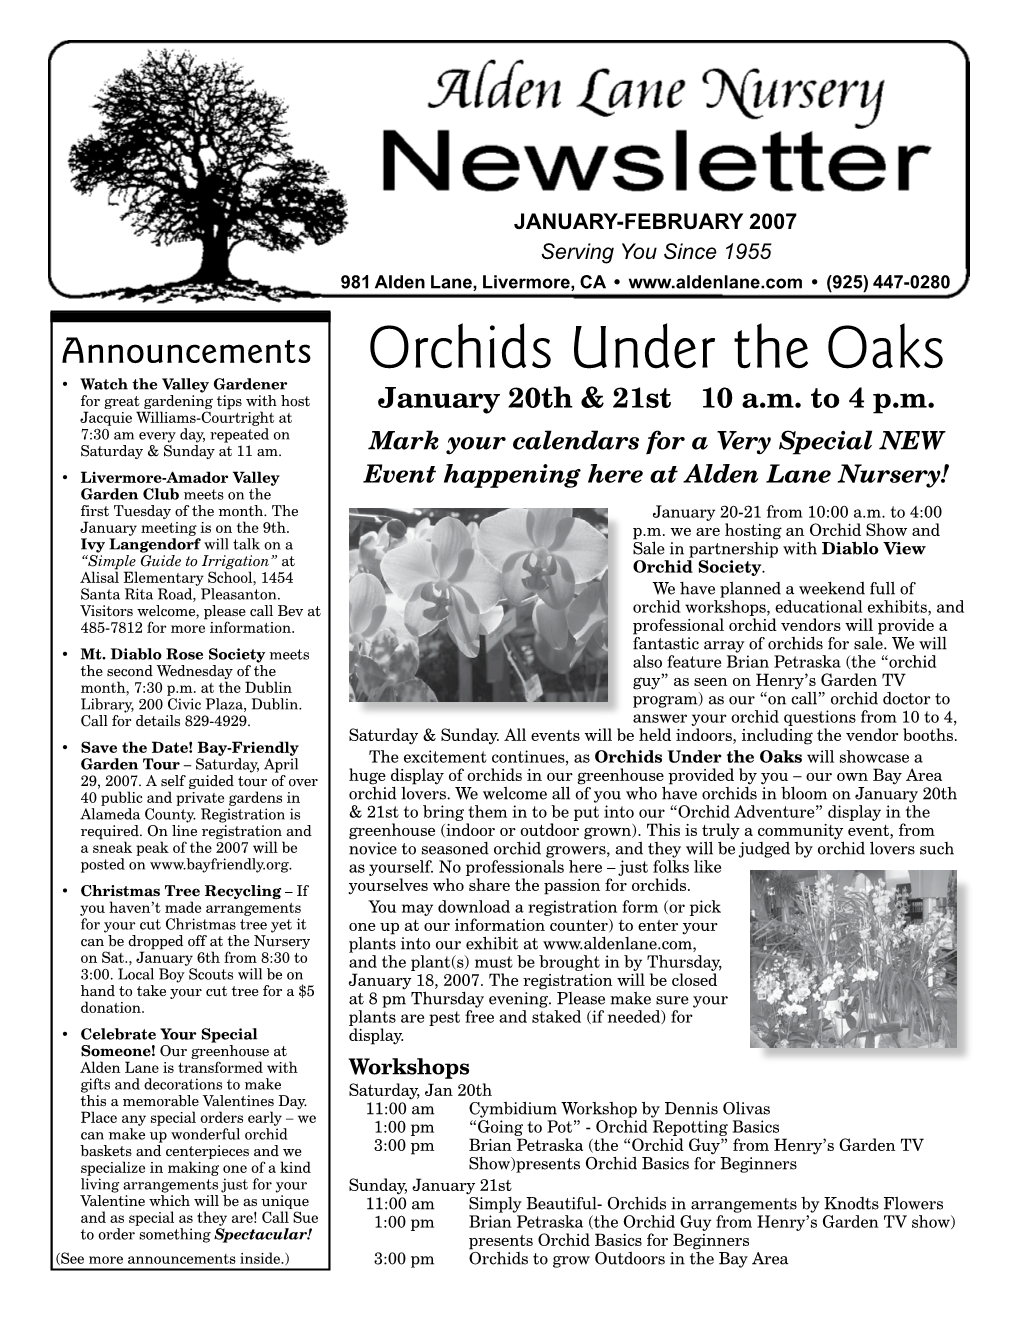 Orchids Under the Oaks • Watch the Valley Gardener for Great Gardening Tips with Host January 20Th & 21St 10 A.M